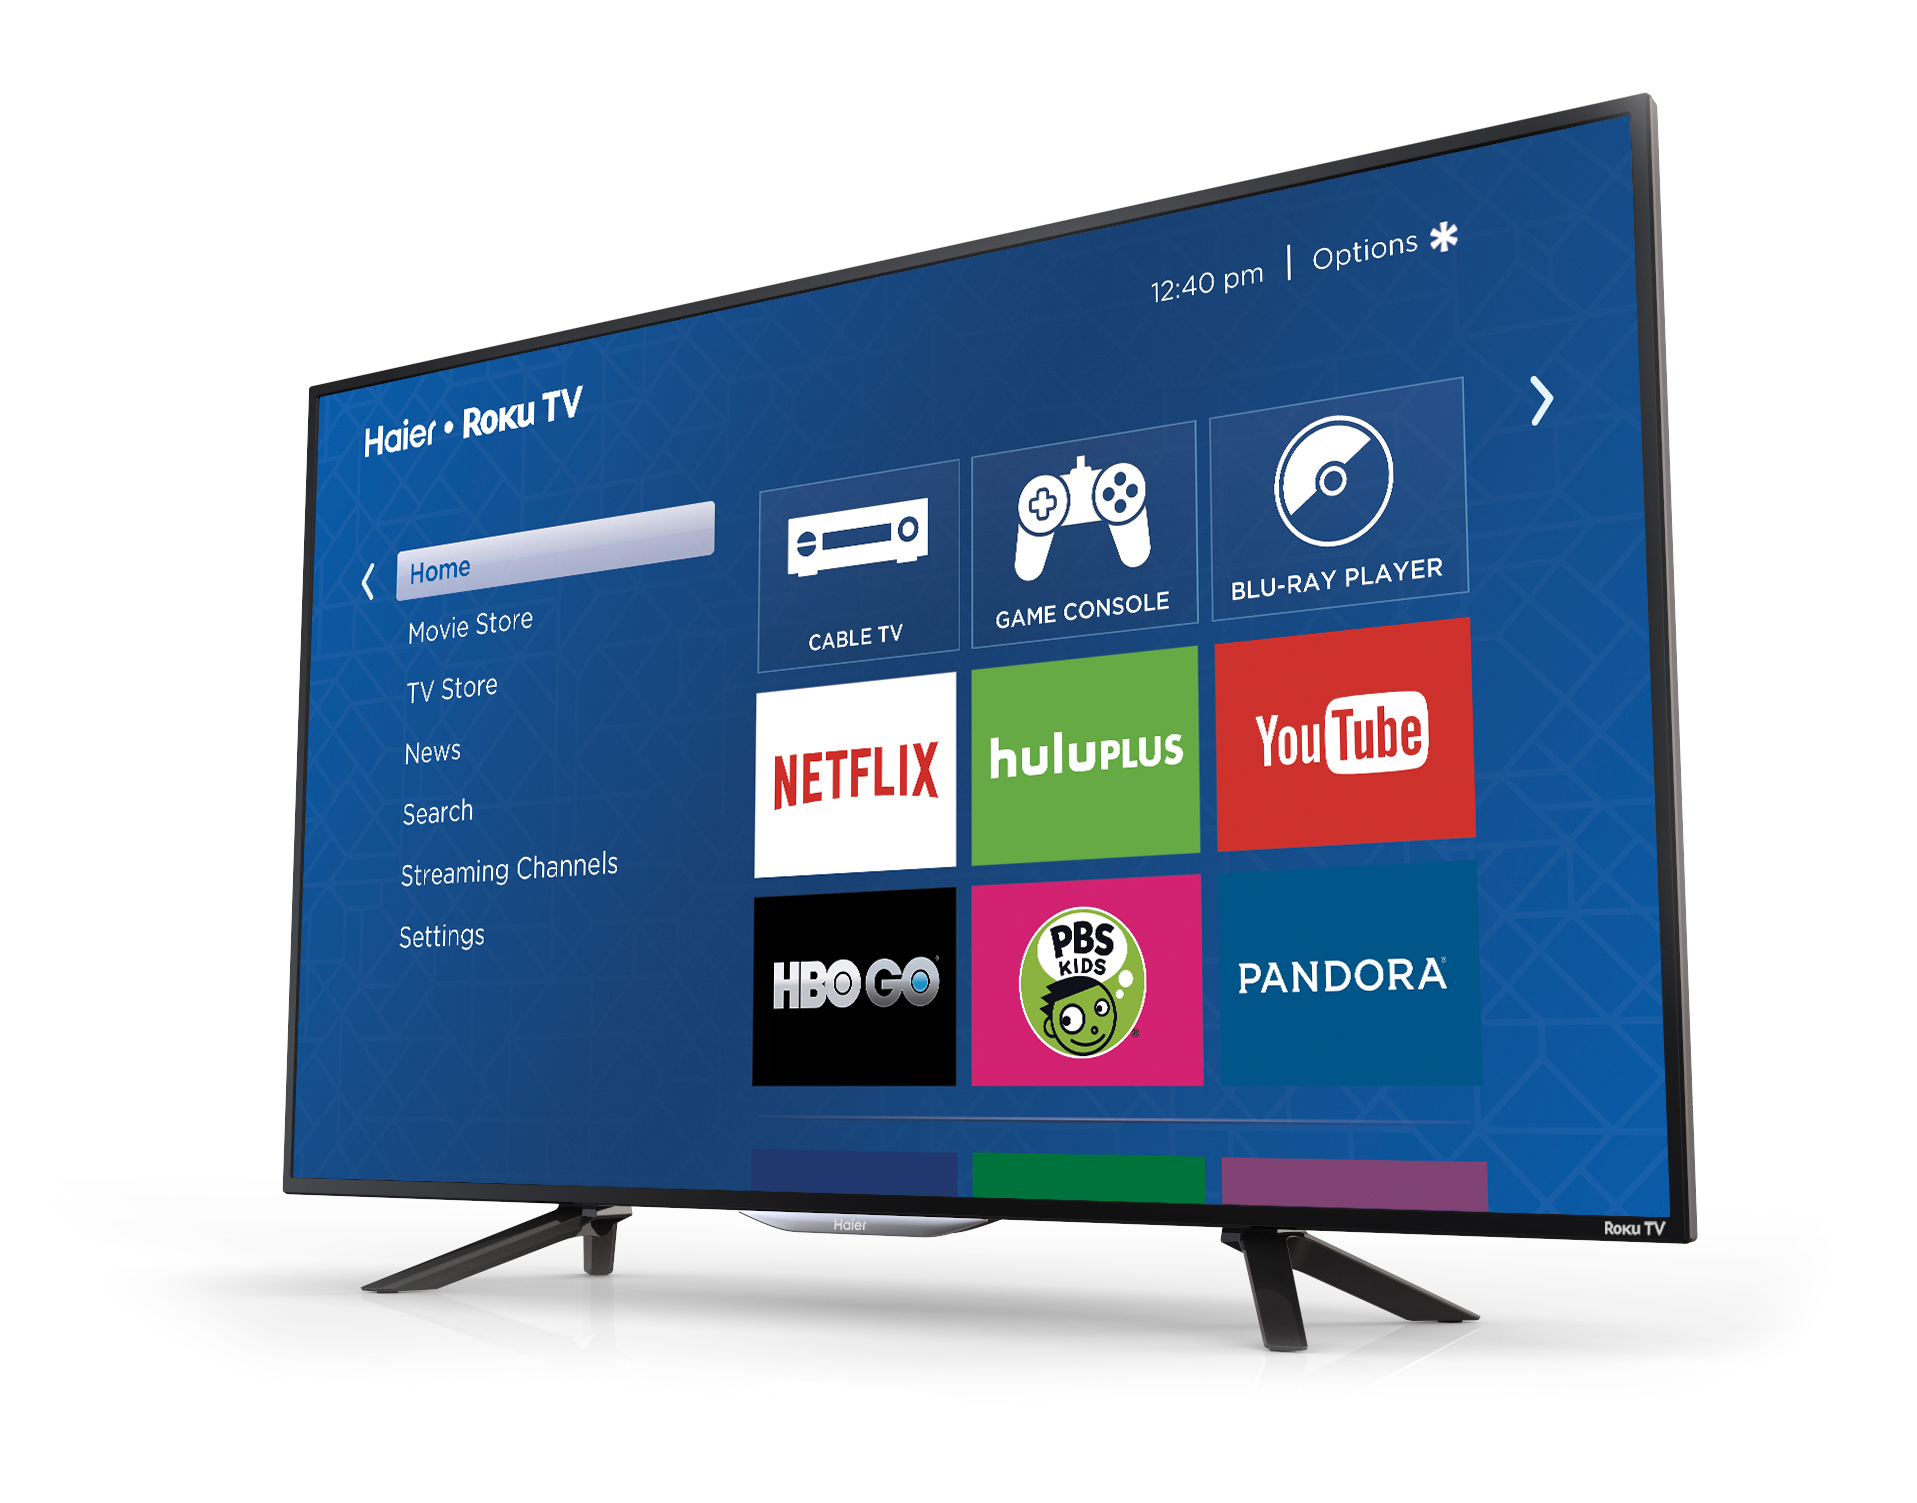 New Haier Roku Tv Models To Launch In 2015 Business Wire